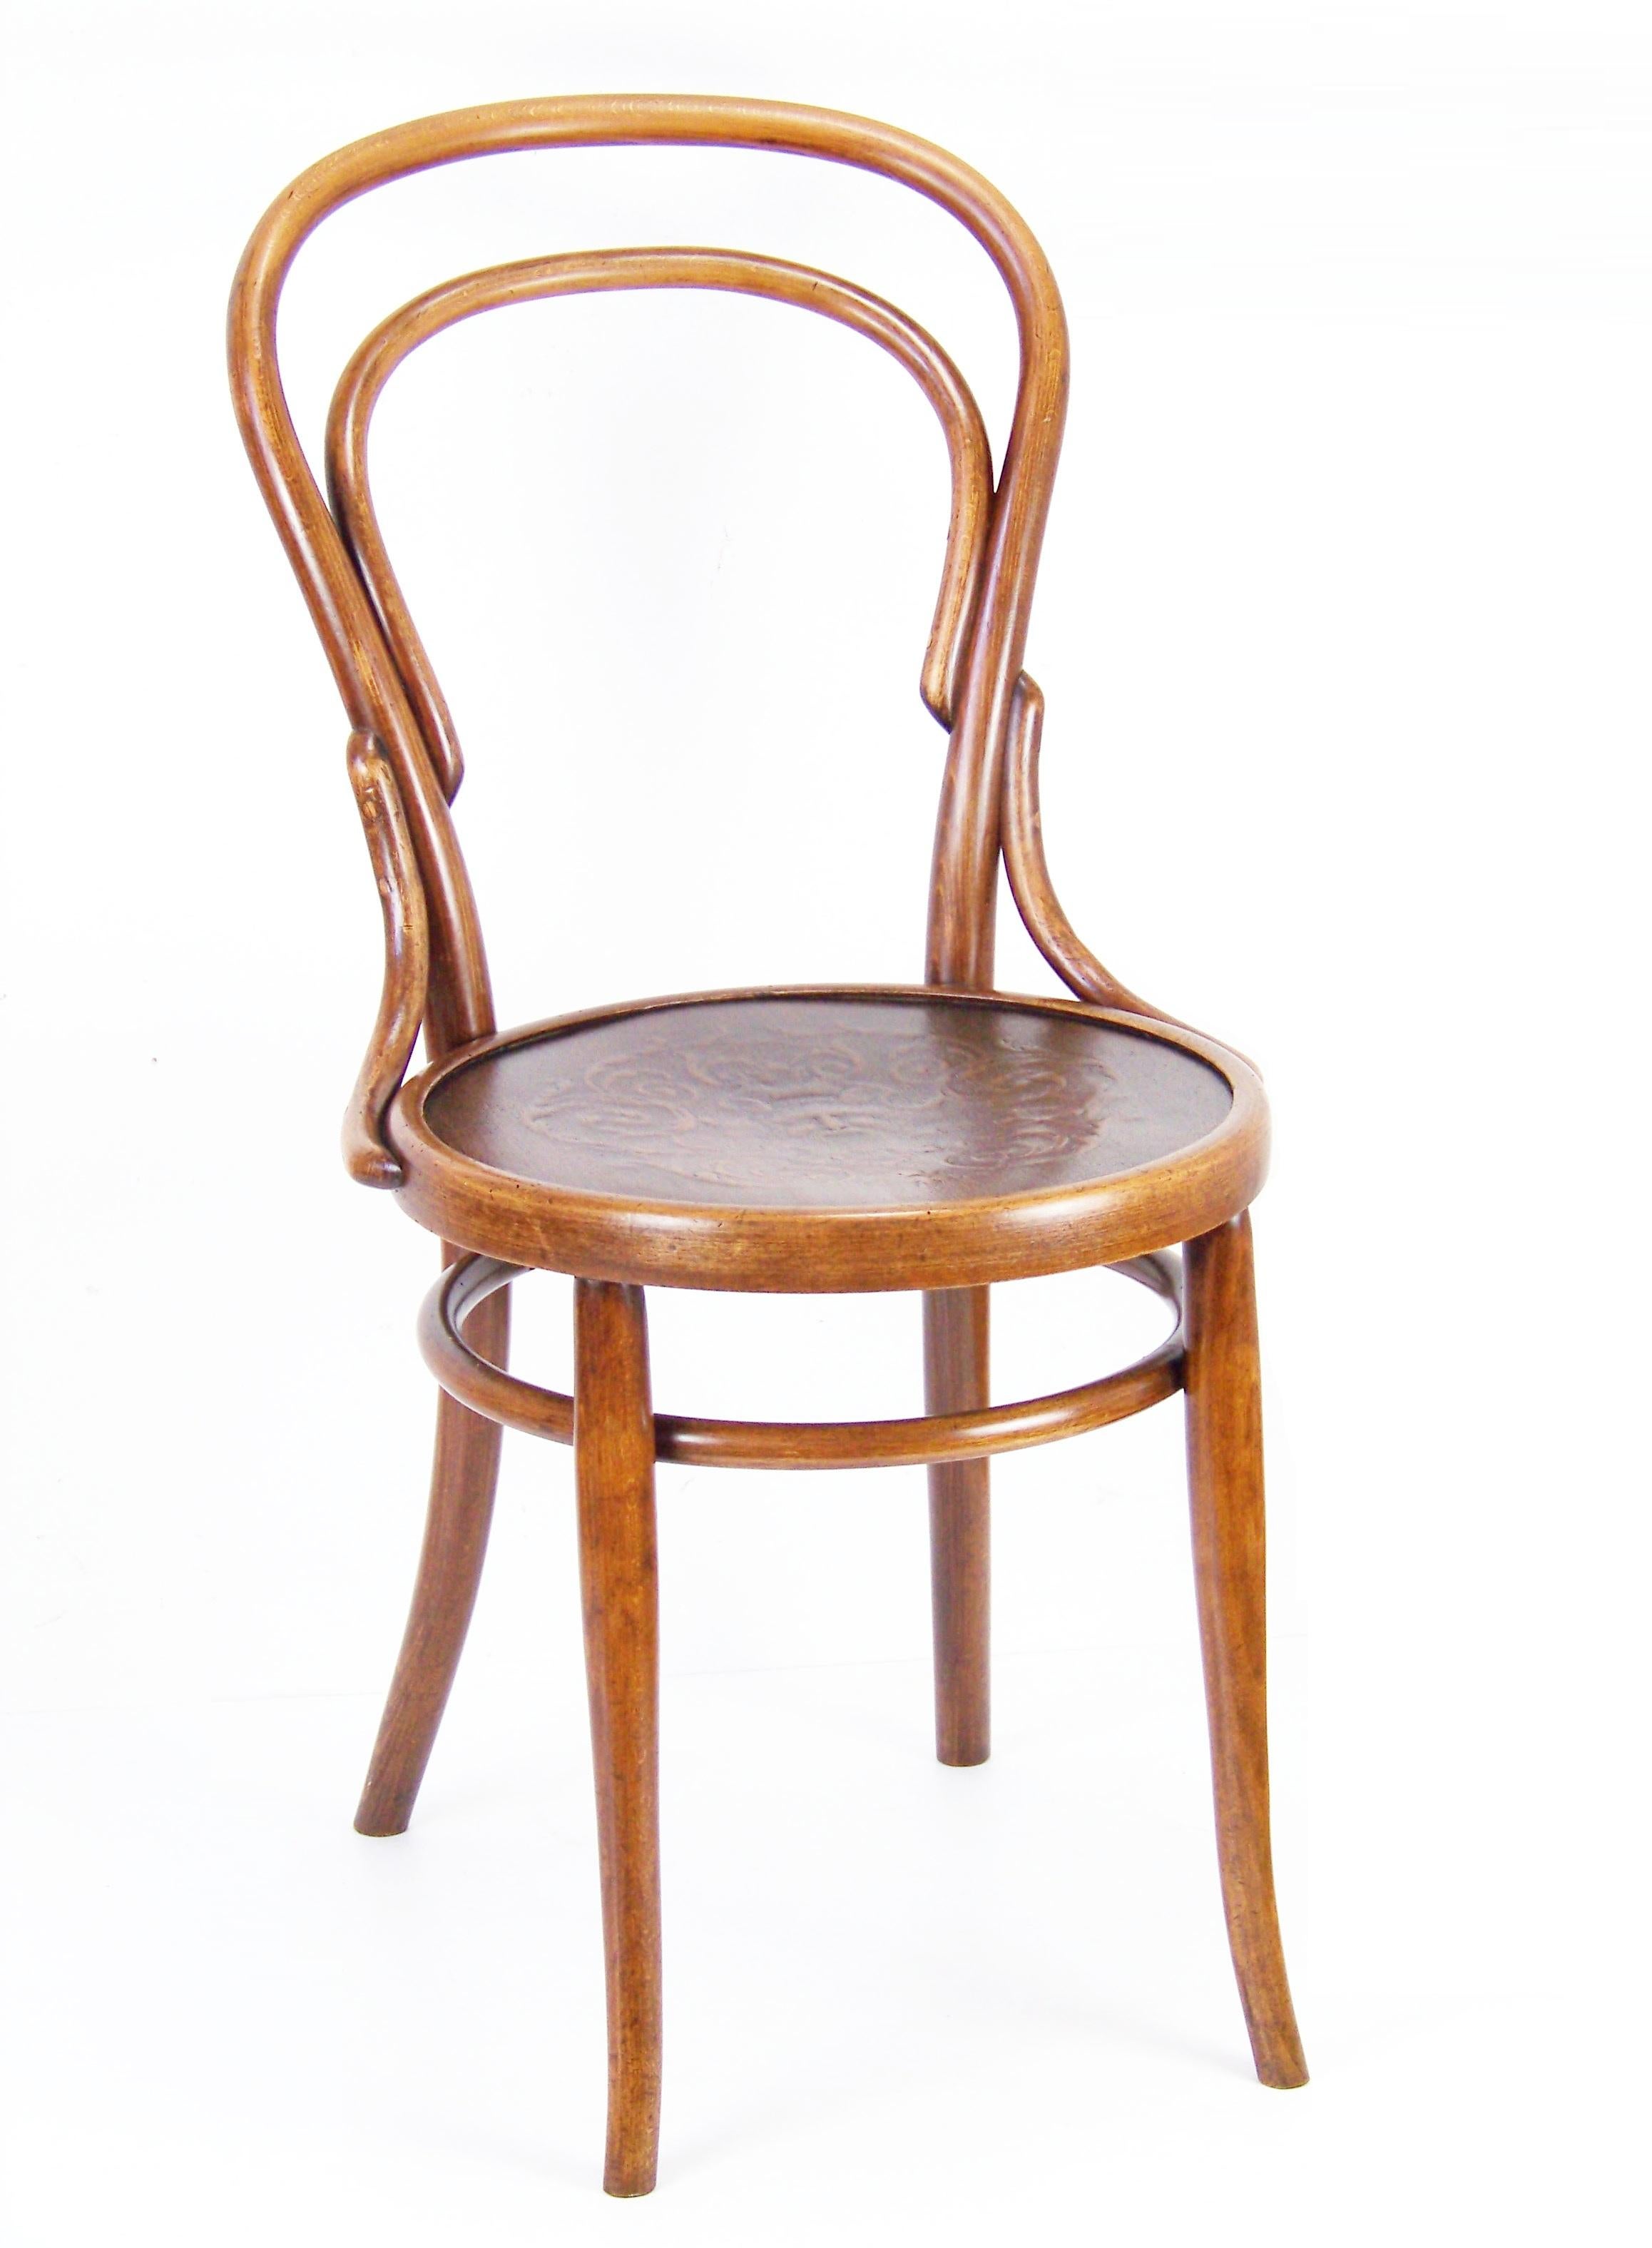 Manufactured in Austria by the Gebrüder Thonet company, circa 1900. Bent beechwood. Original condition with minor signs of use. Chairs was cleaned and gentle re-polished with shellack finish. Tinny traces of woodworm (already inactive). Chair are